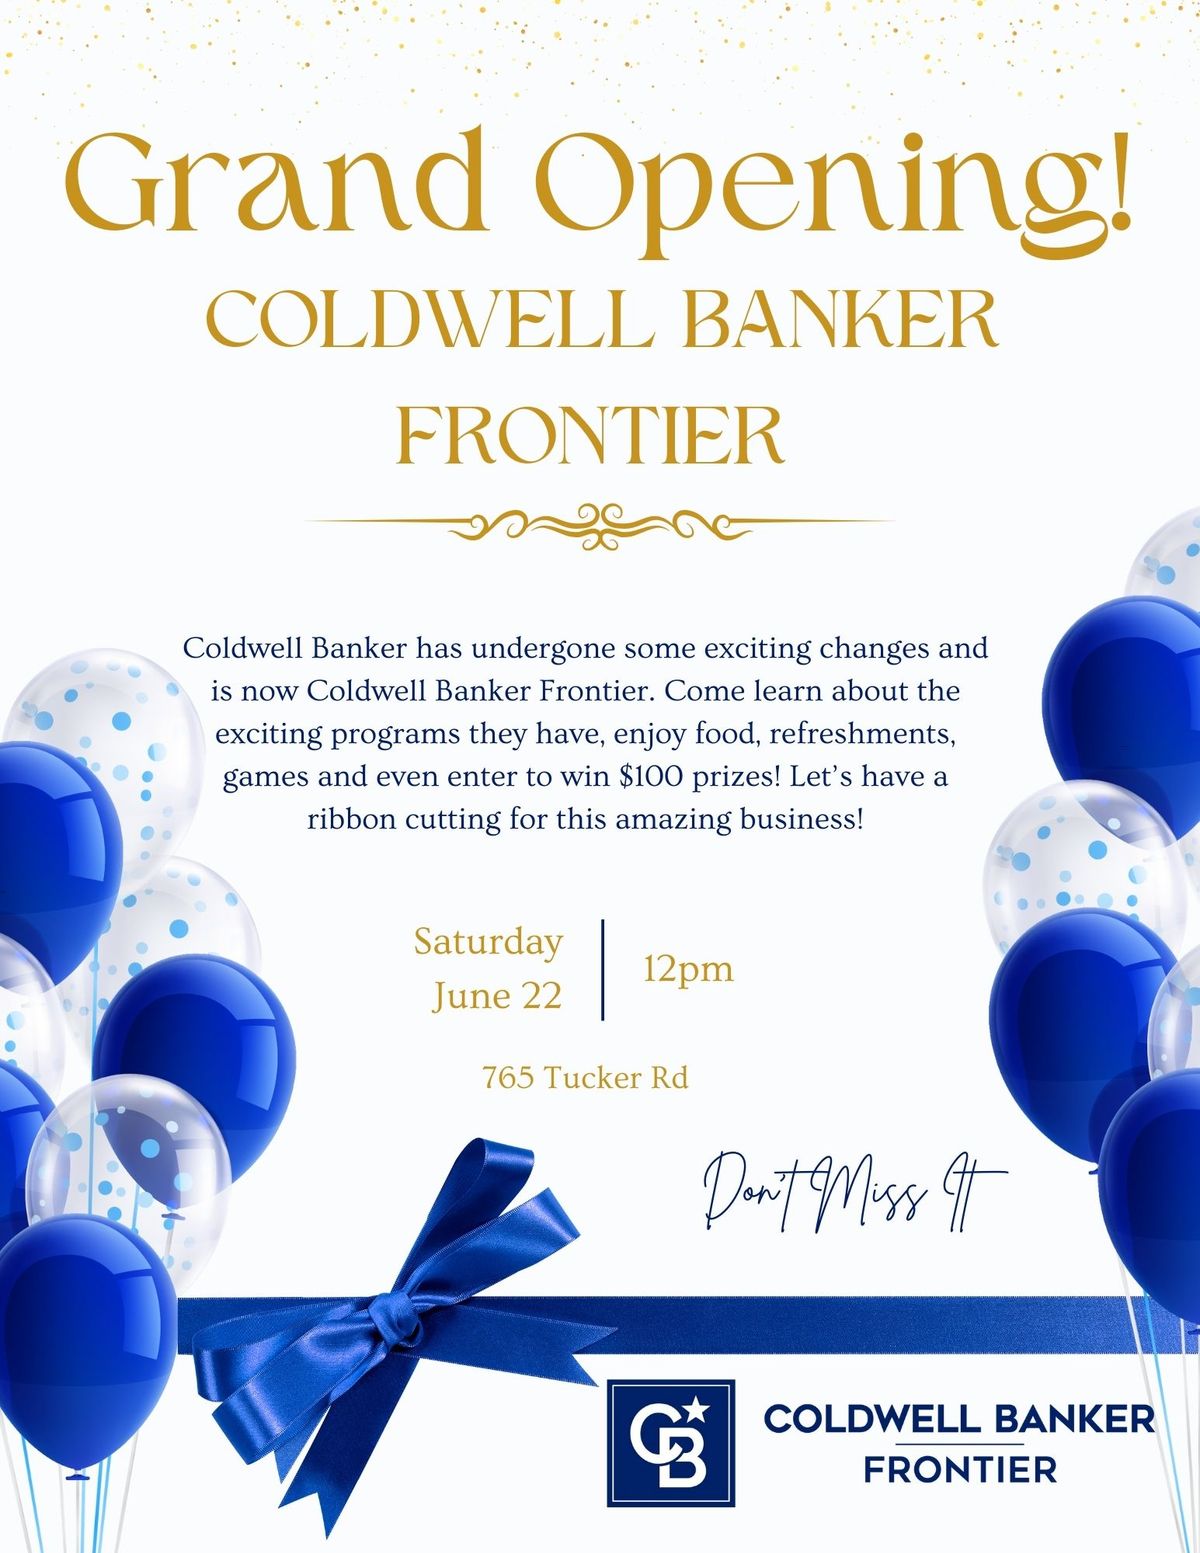 Grand Opening & Ribbon Cutting for Coldwell Banker Frontier!